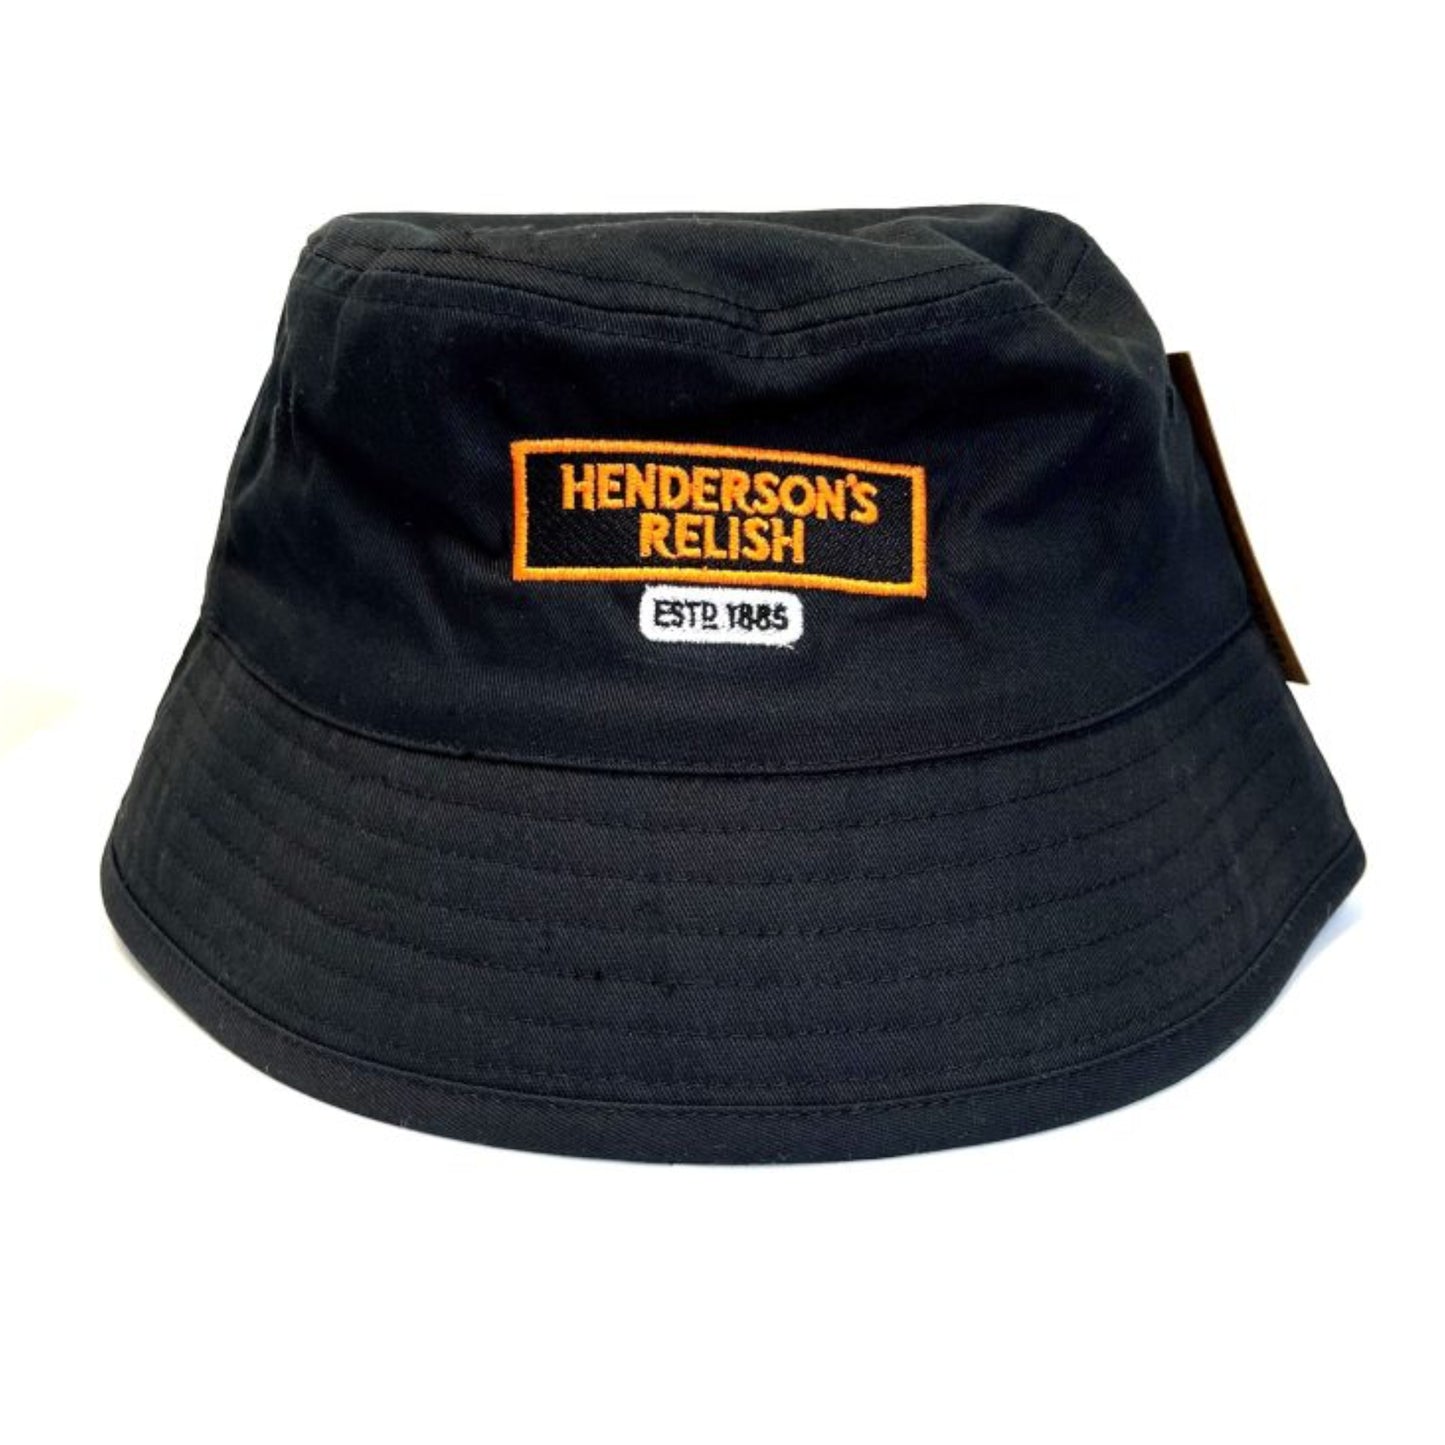 Hendersons Relish Embroidered Organic Cotton Bucket Hat - The Great Yorkshire Shop